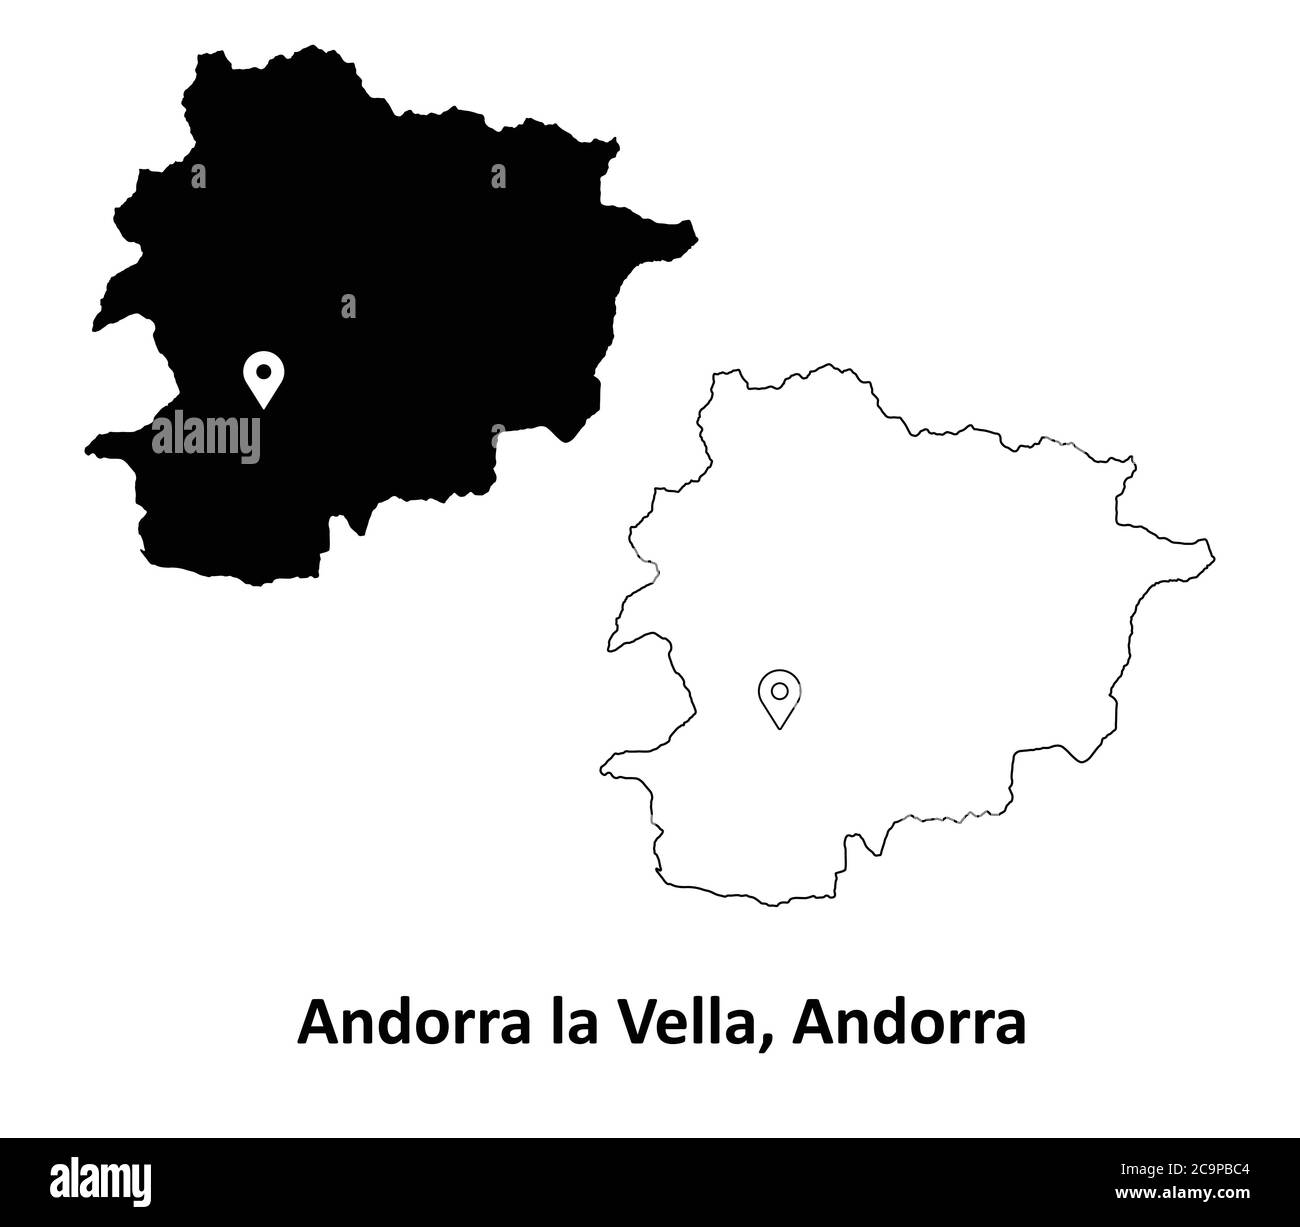 Andorra la Vella, Andorra. Detailed Country Map with Capital City Location Pin. Black silhouette and outline maps isolated on white background. EPS Ve Stock Vector